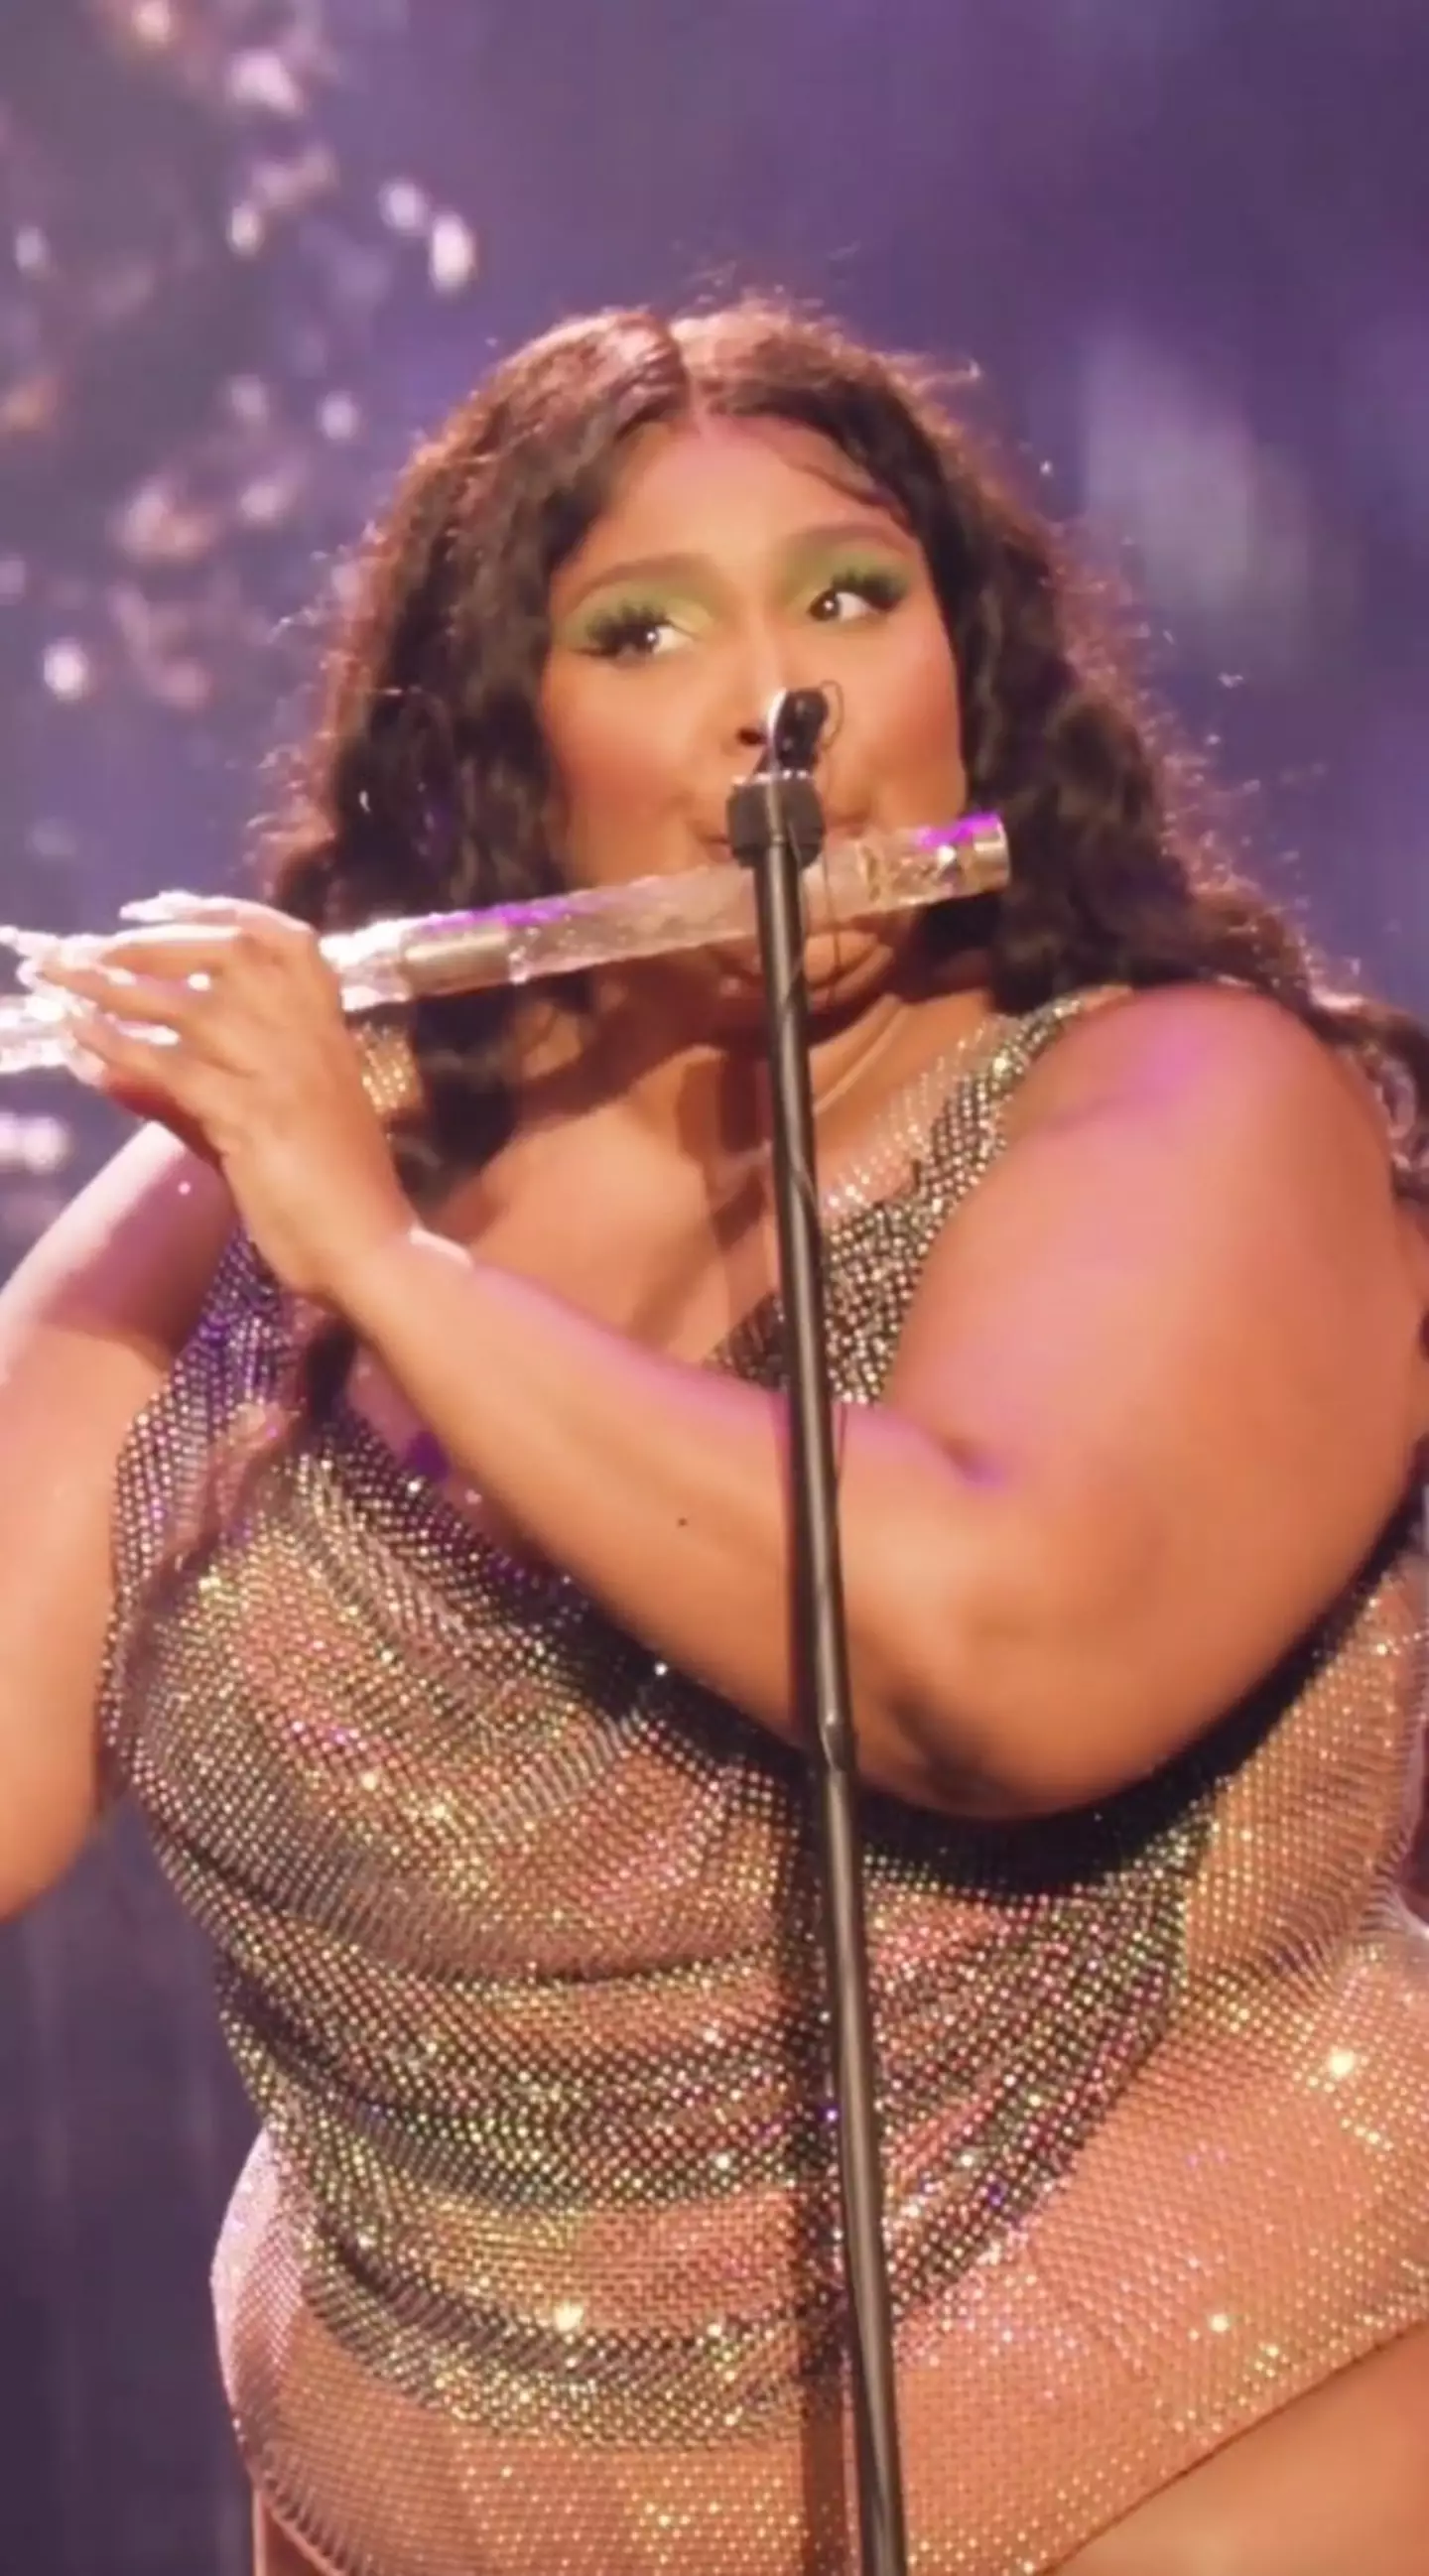 Lizzo well and truly rocked the 200-year-old crystal flute.